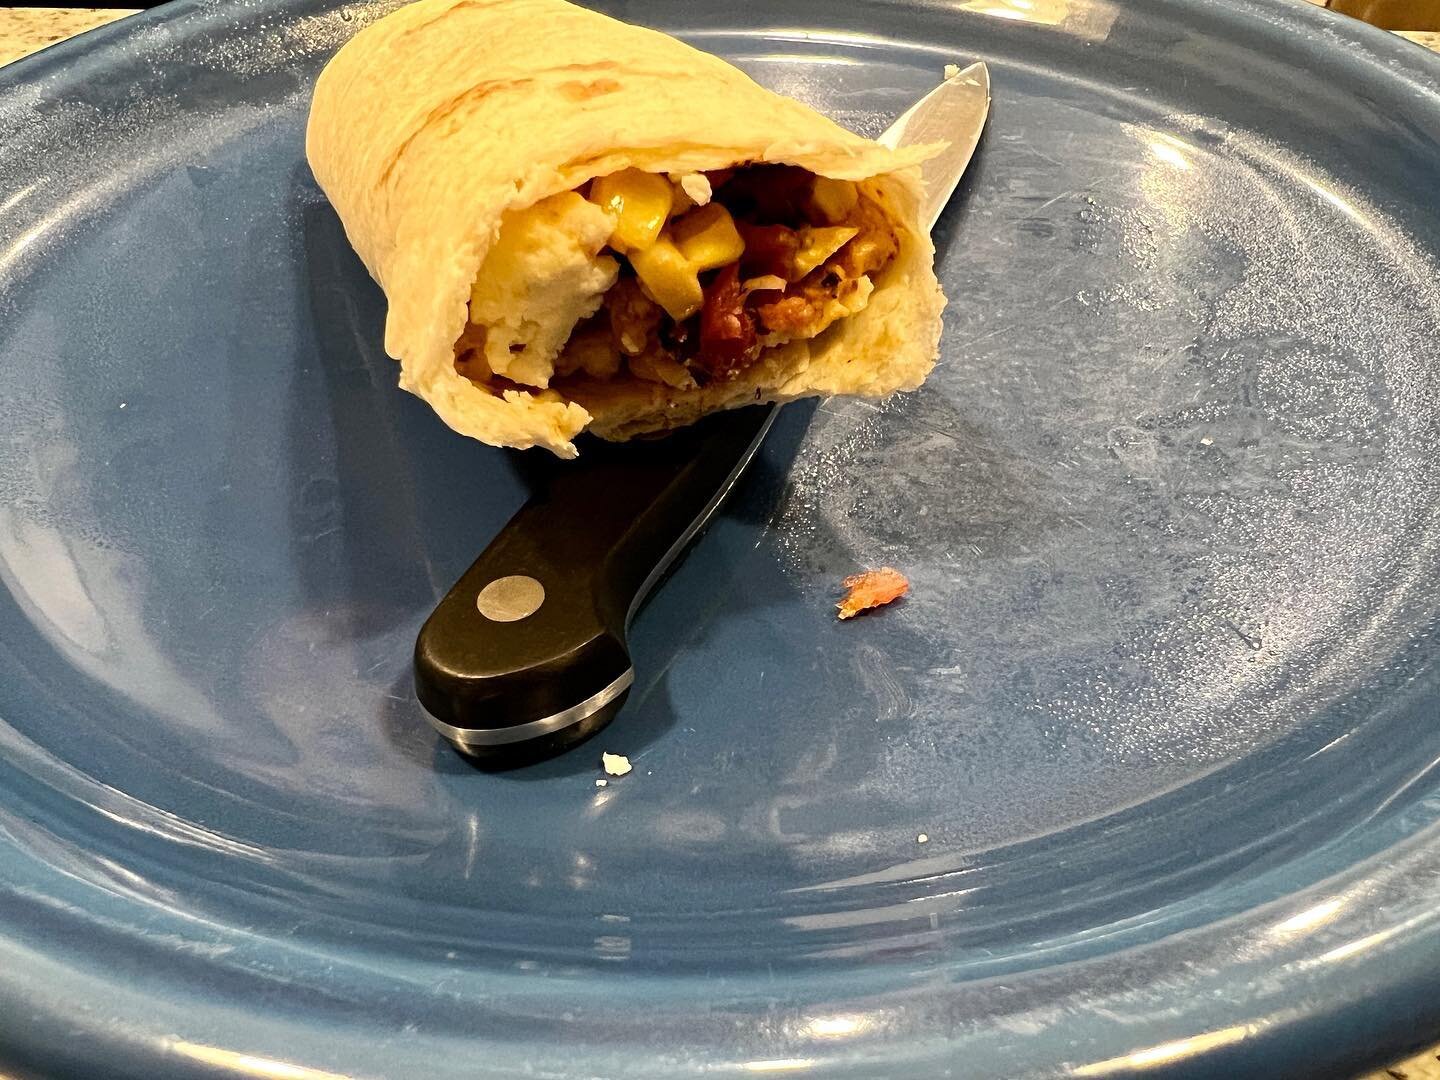 Cooked up some pork hock (pig knuckle) tacos!

https://youtu.be/pxmEt32t6pY